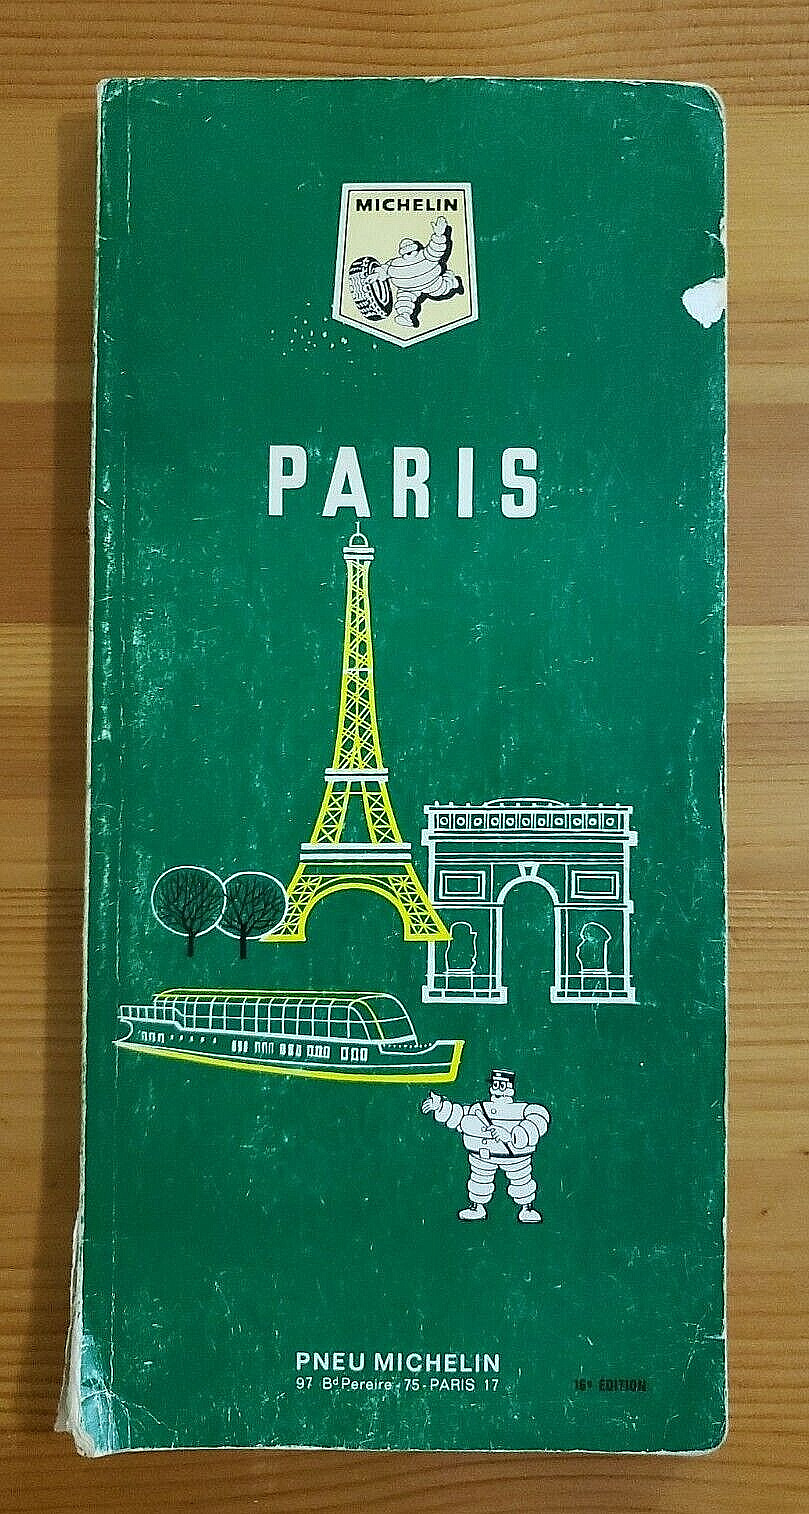 Vtg 1968 Michelin Tiremaker Paris France Green Travel Guide Book French Edition